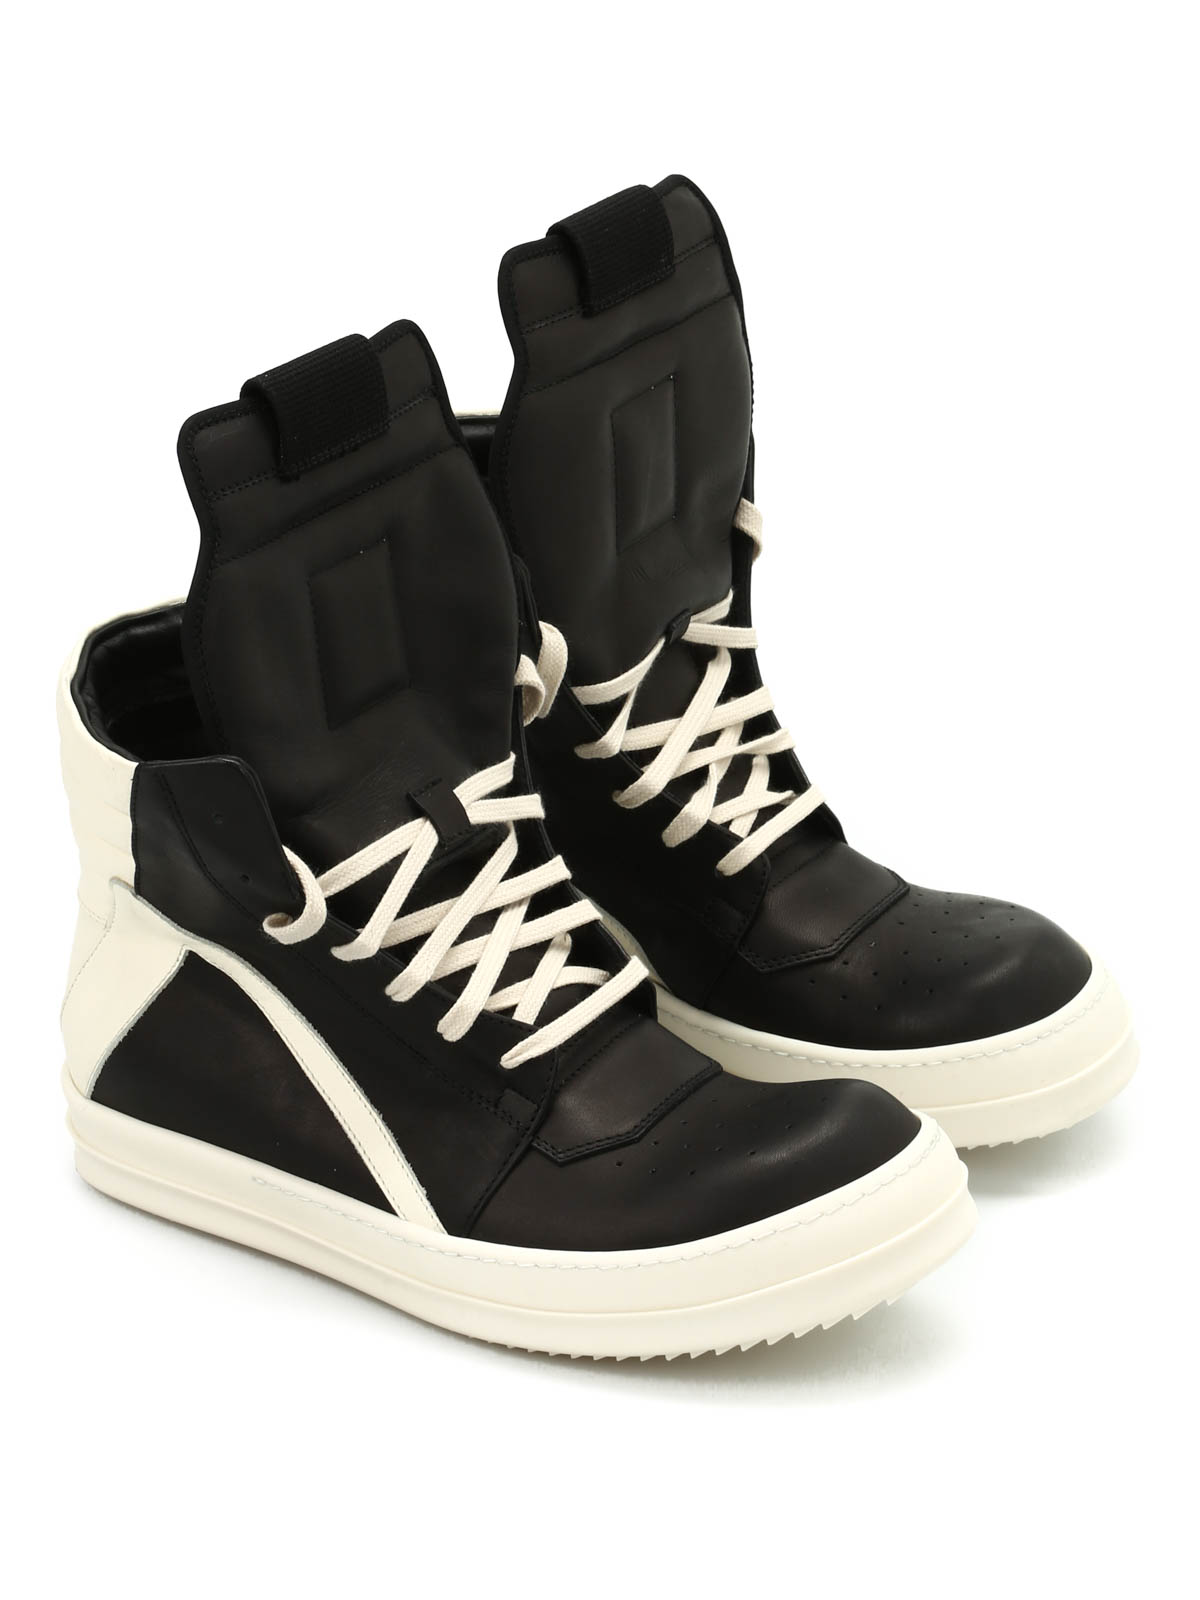 Rick Owens Leather Geobasket Sneakers for Men Mens Shoes Trainers High-top trainers 